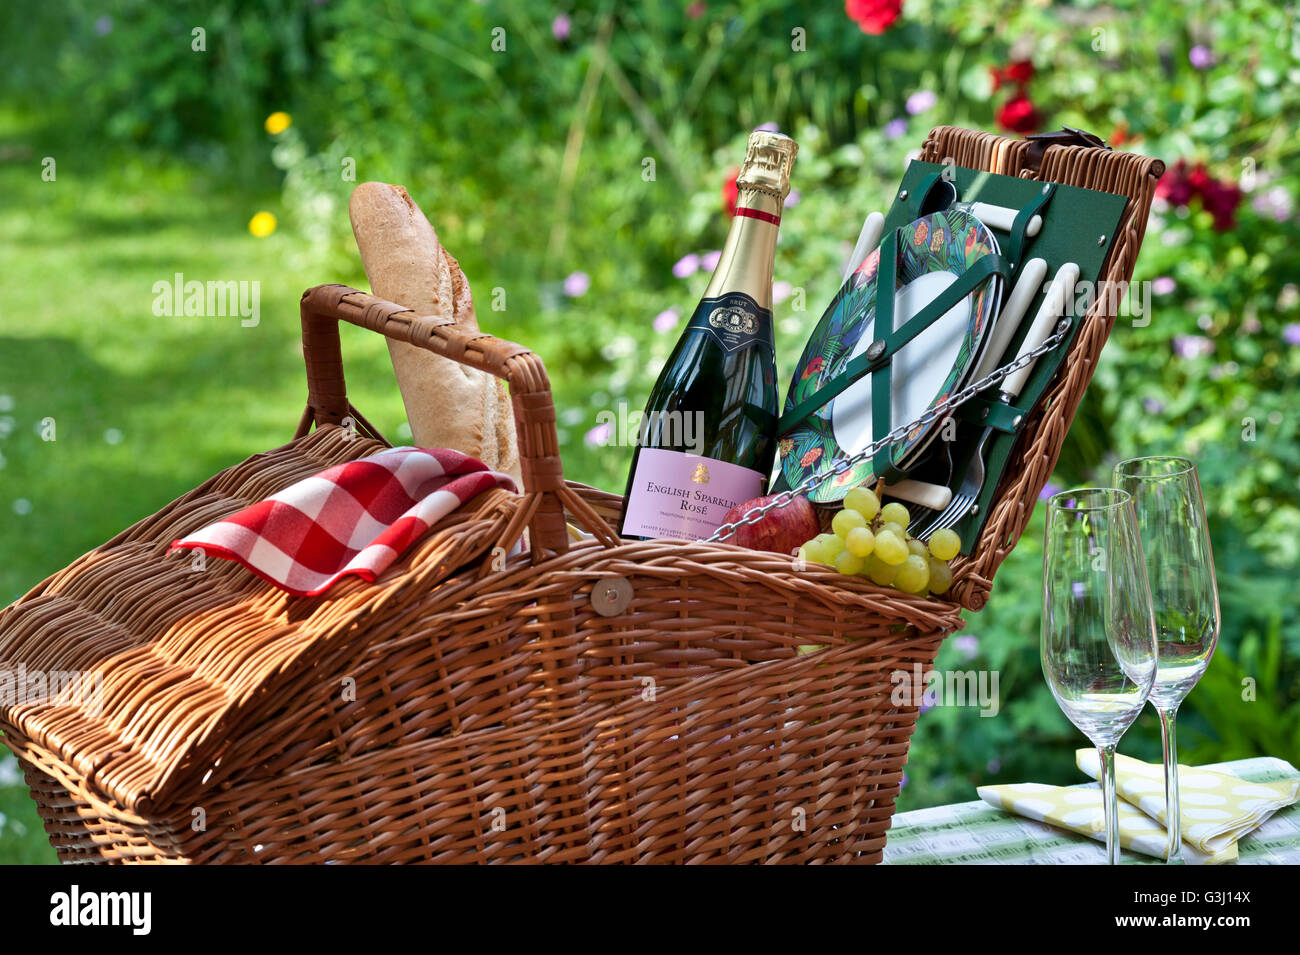 English sparkling Rosé wine bottle and wicker picnic basket in sunny floral English garden situation Stock Photo